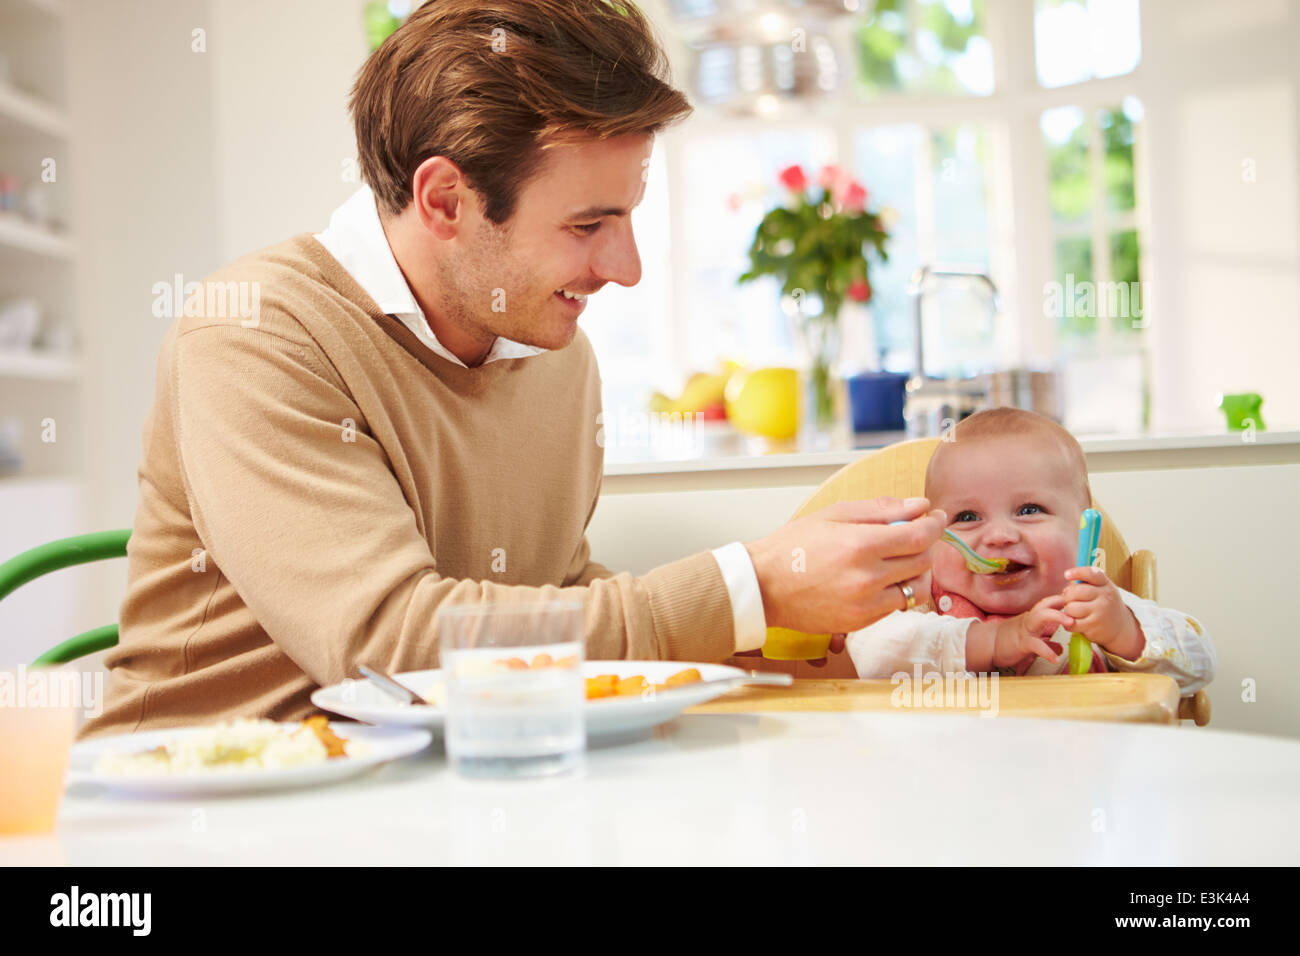 Father Feeding Baby Sitting In High Chair At Mealtime Stock Photo